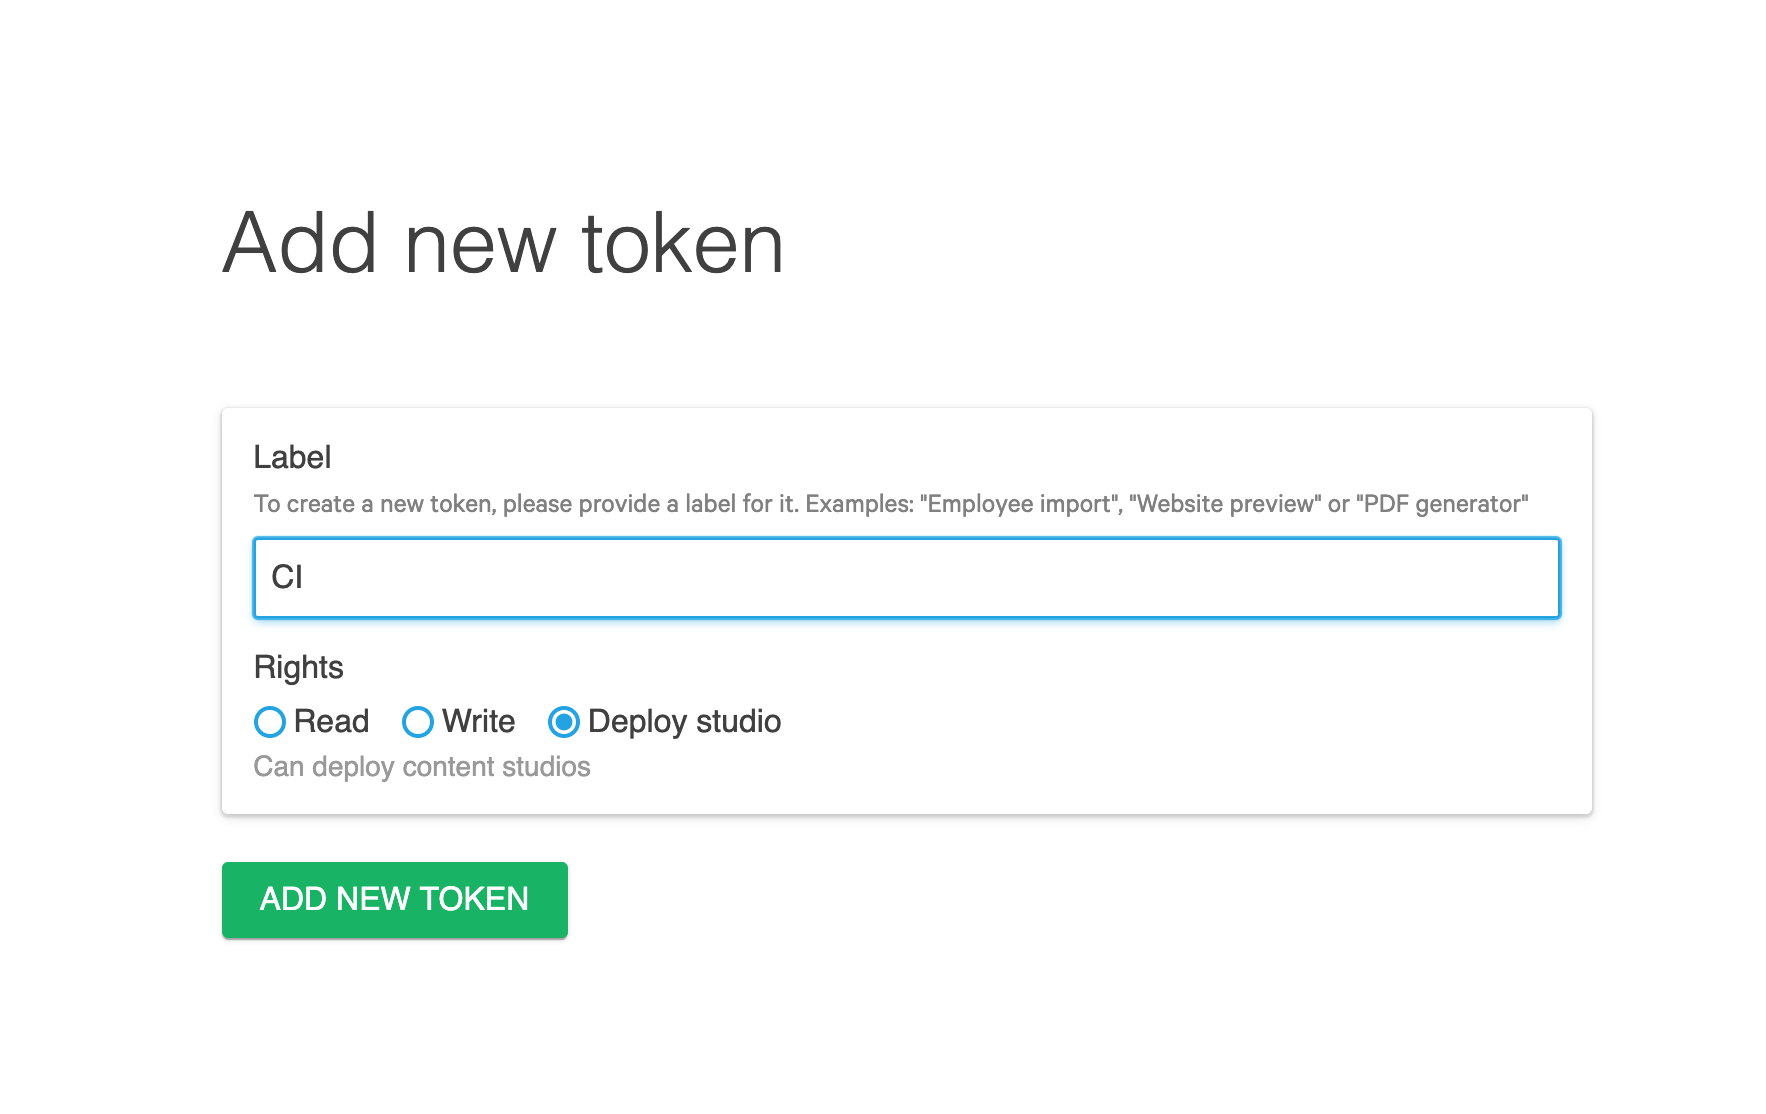 A modal showing configuration options for auth tokens on sanity.io